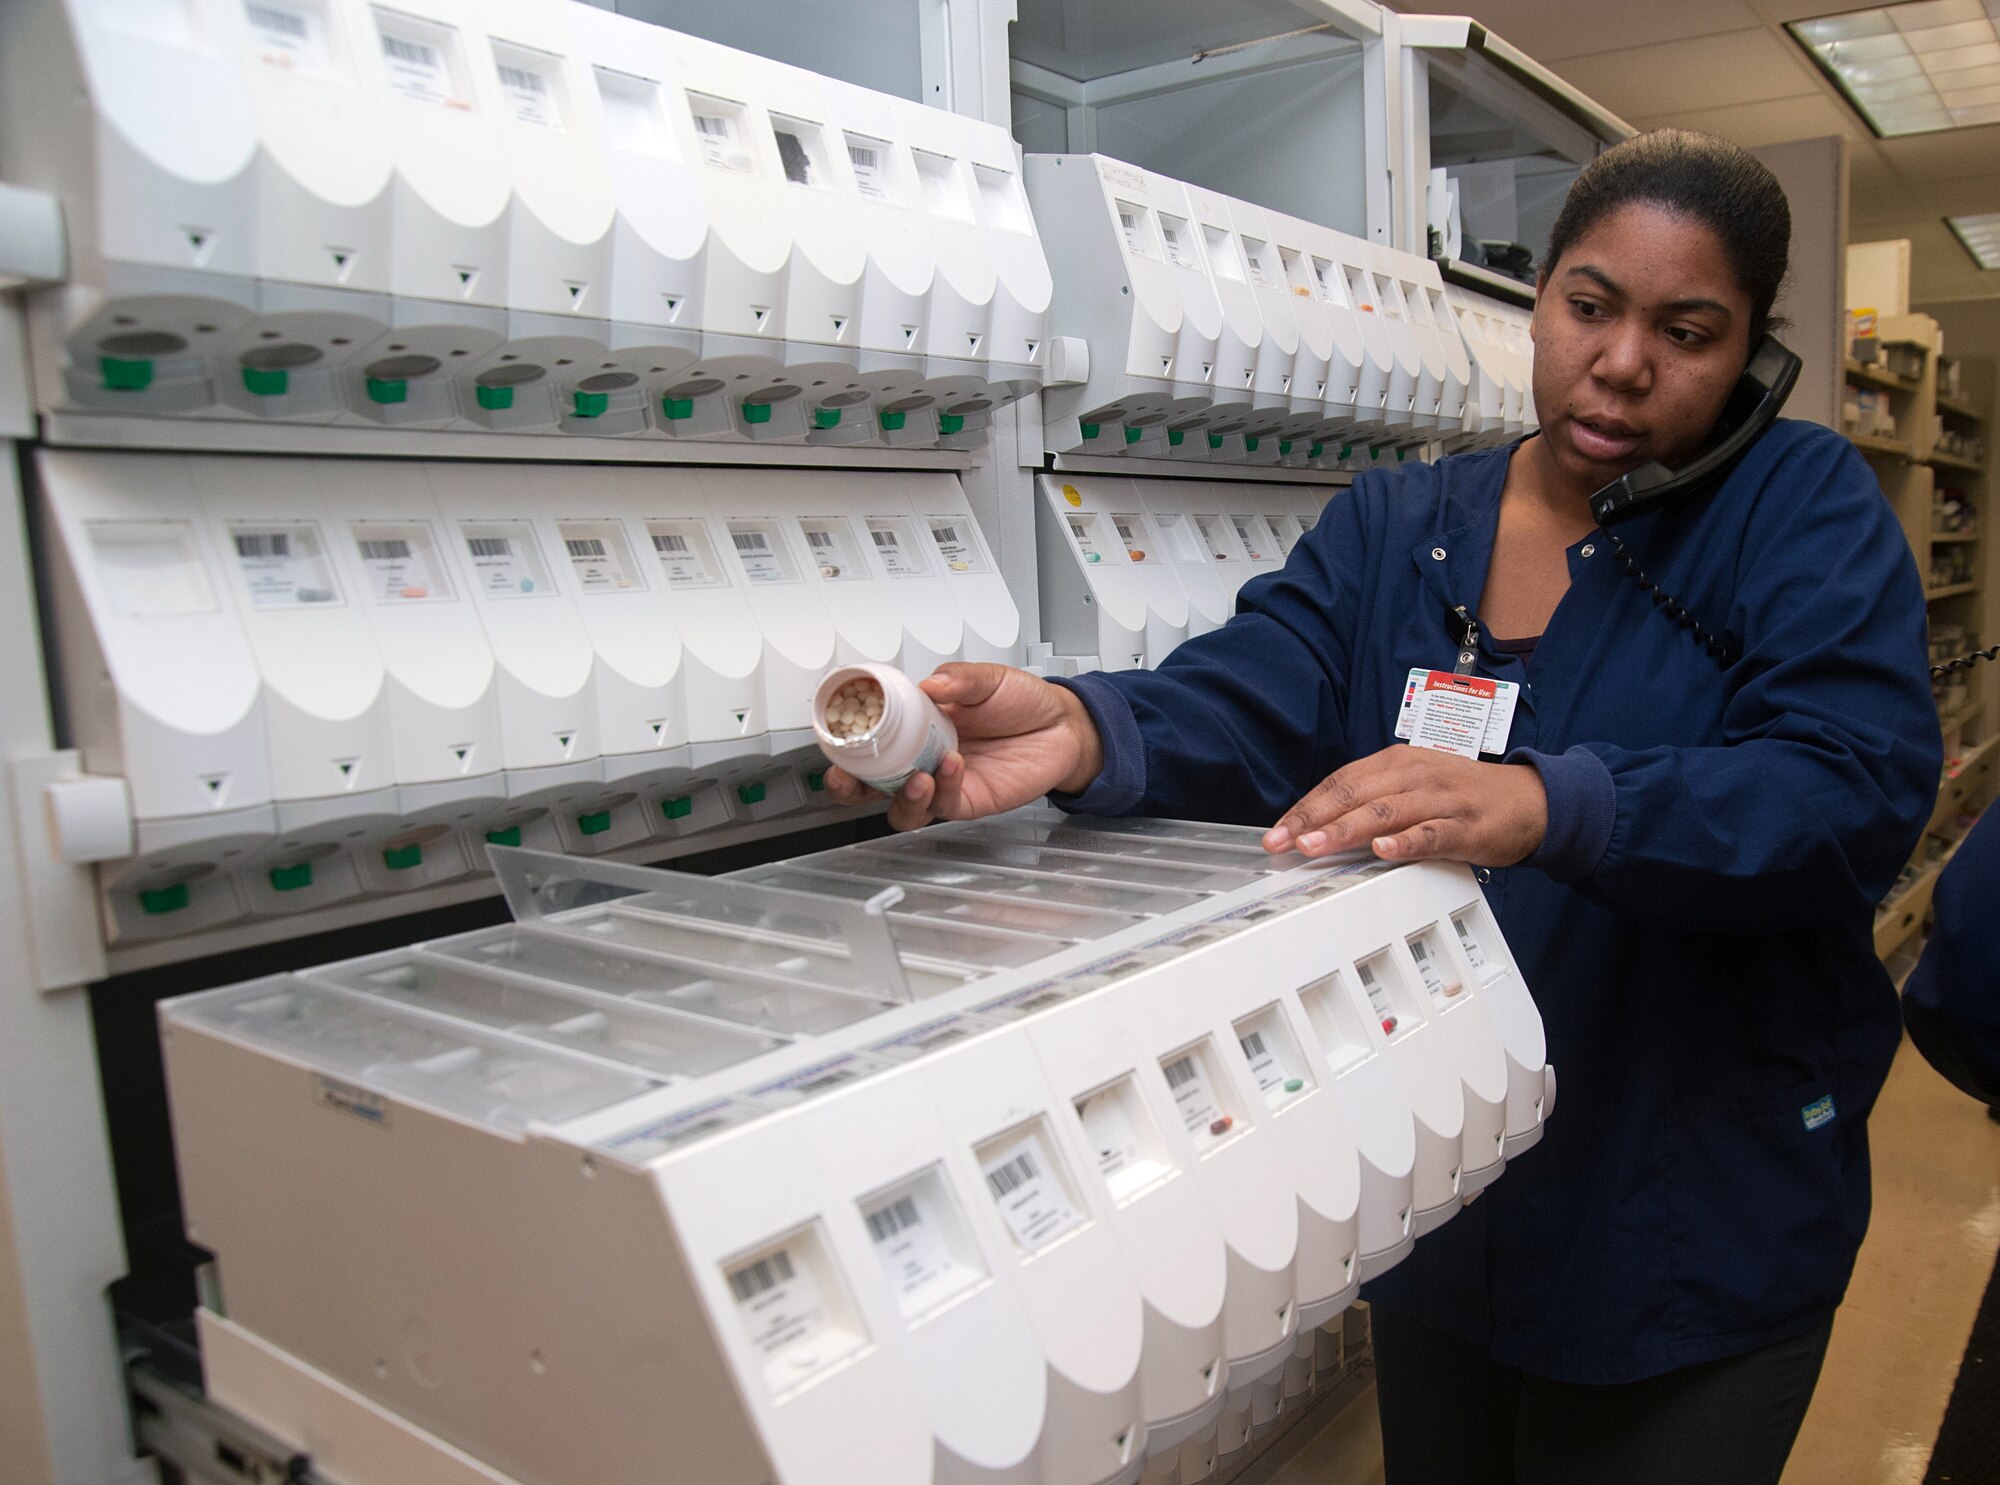 A 779th Medical Support Squadron pharmacy technician counts pills at the Malcolm Grow Medical Center Main Pharmacy on March 6. The main pharmacy administers more than 350,000 medications annually. (Photo/Bobby Jones)